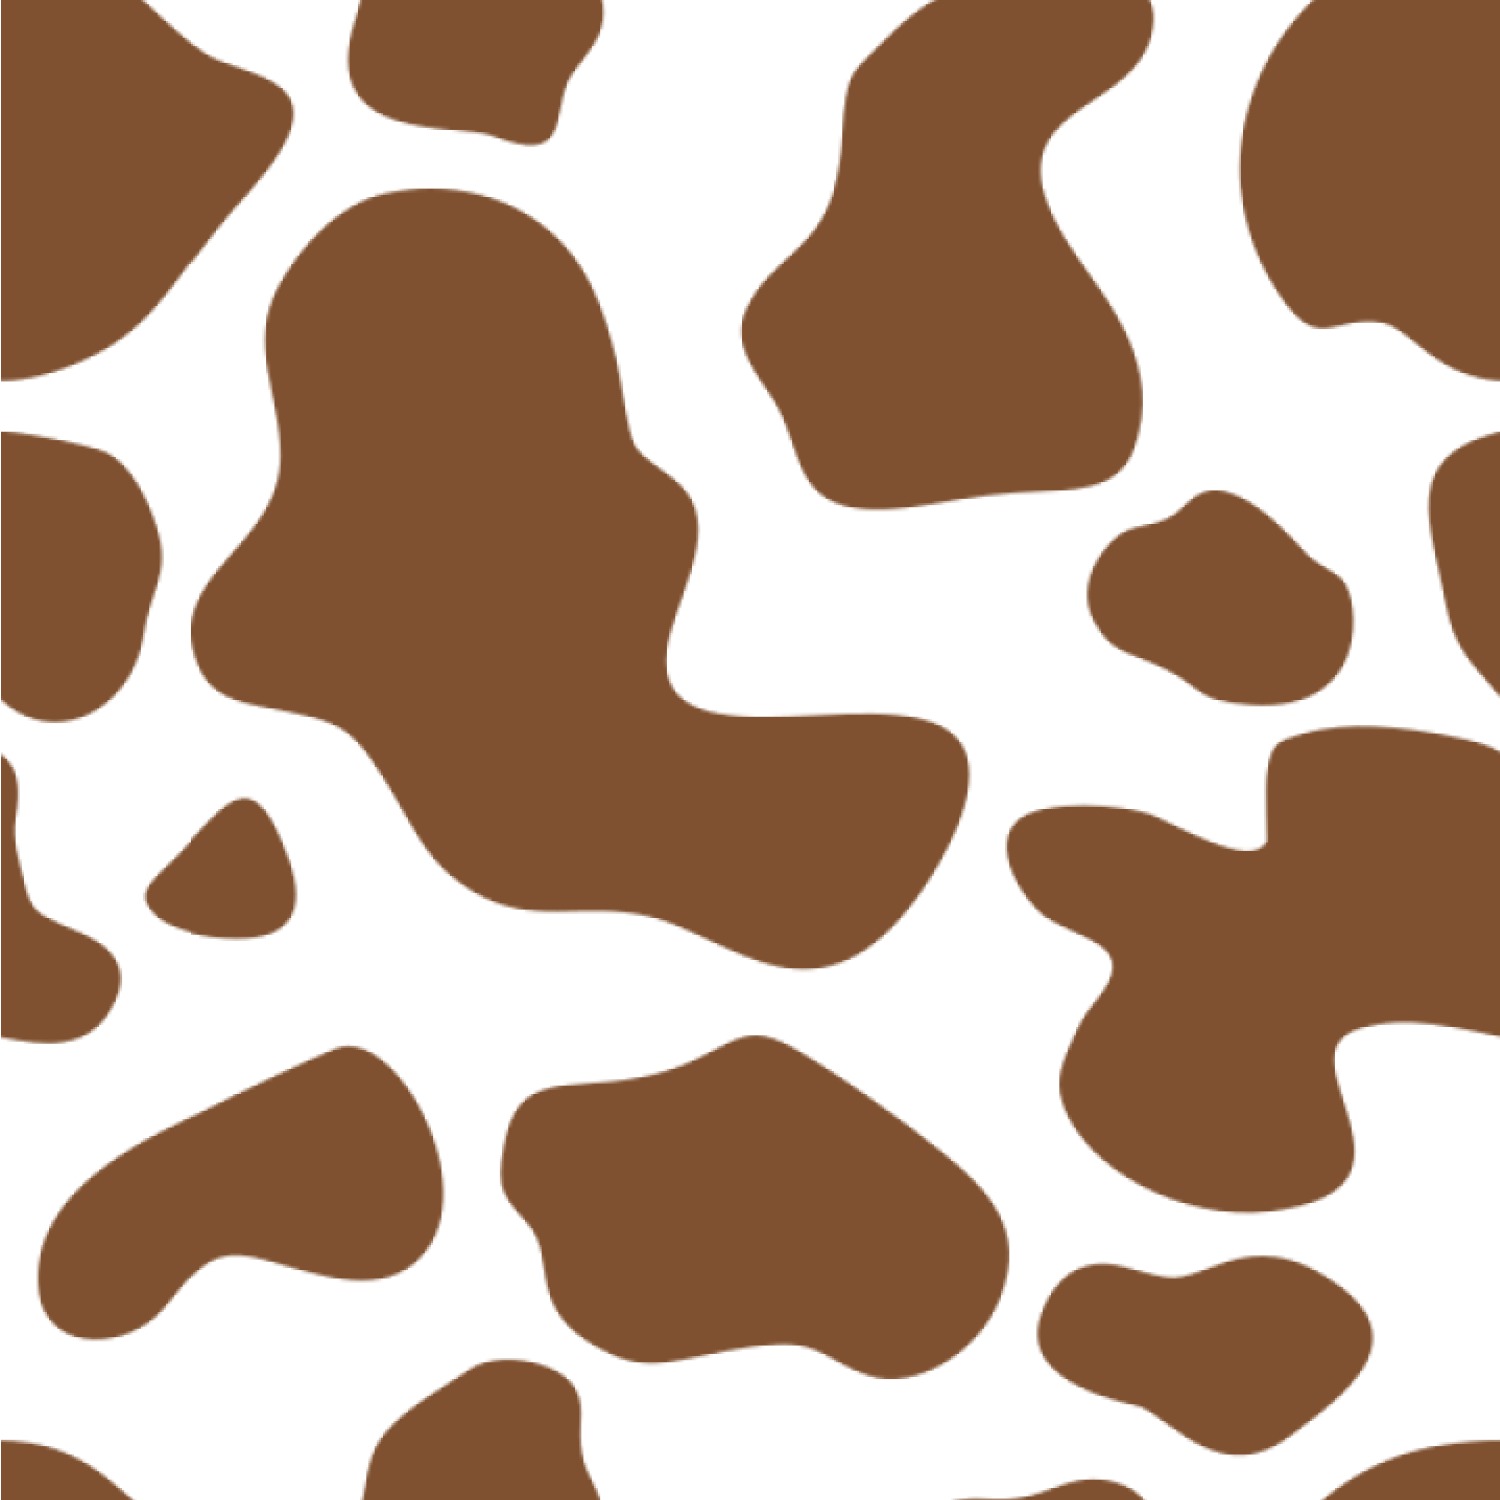 Custom Cow Print Wallpaper & Surface Covering | YouCustomizeIt